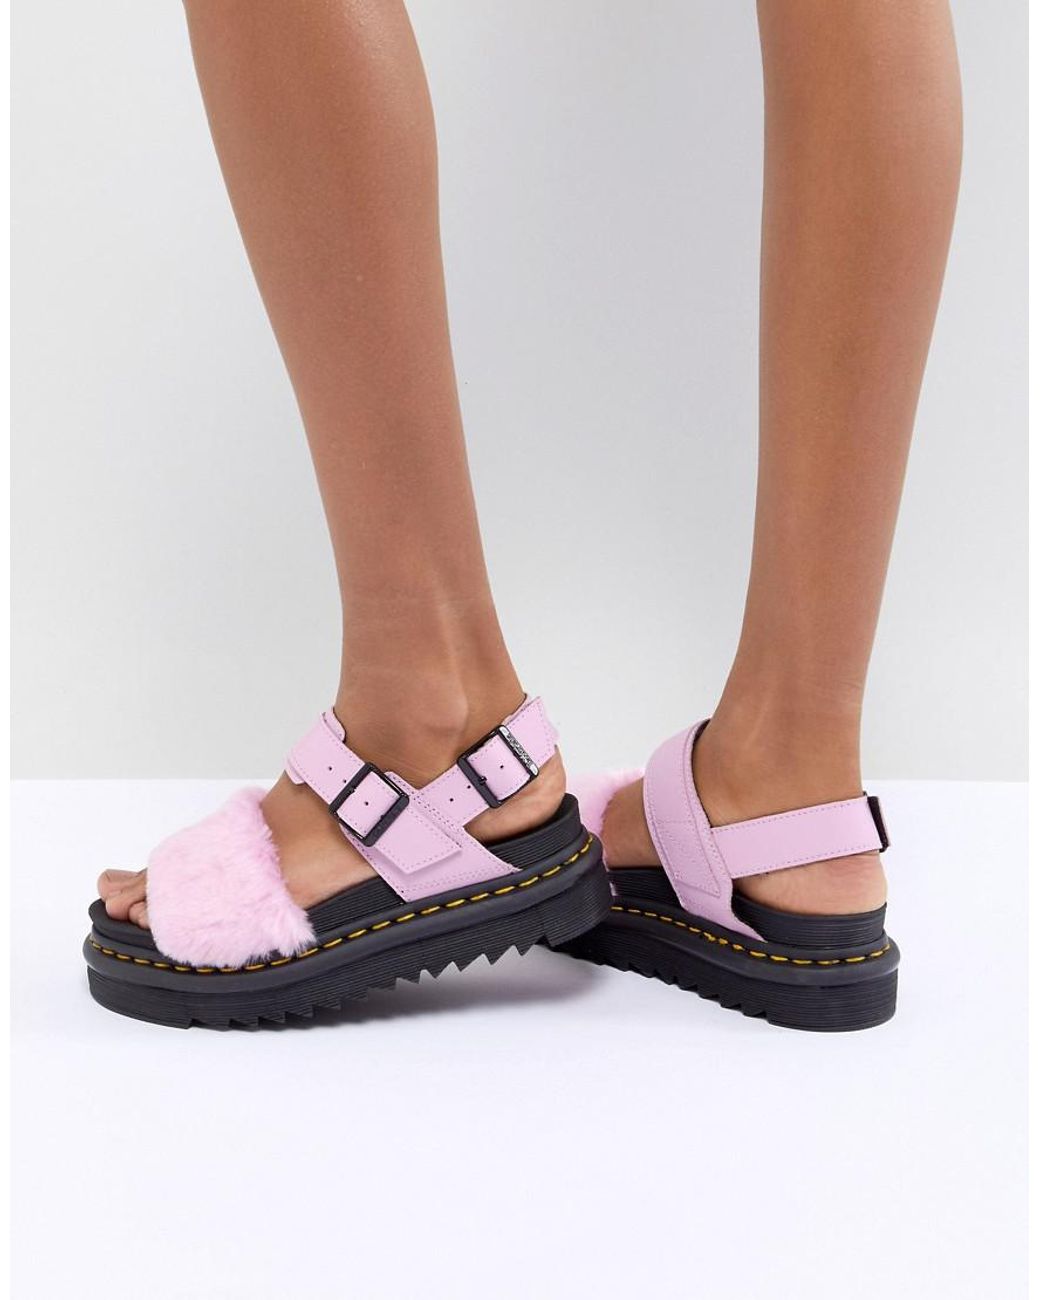 Dr. Voss Flat Sandals in Pink | Lyst